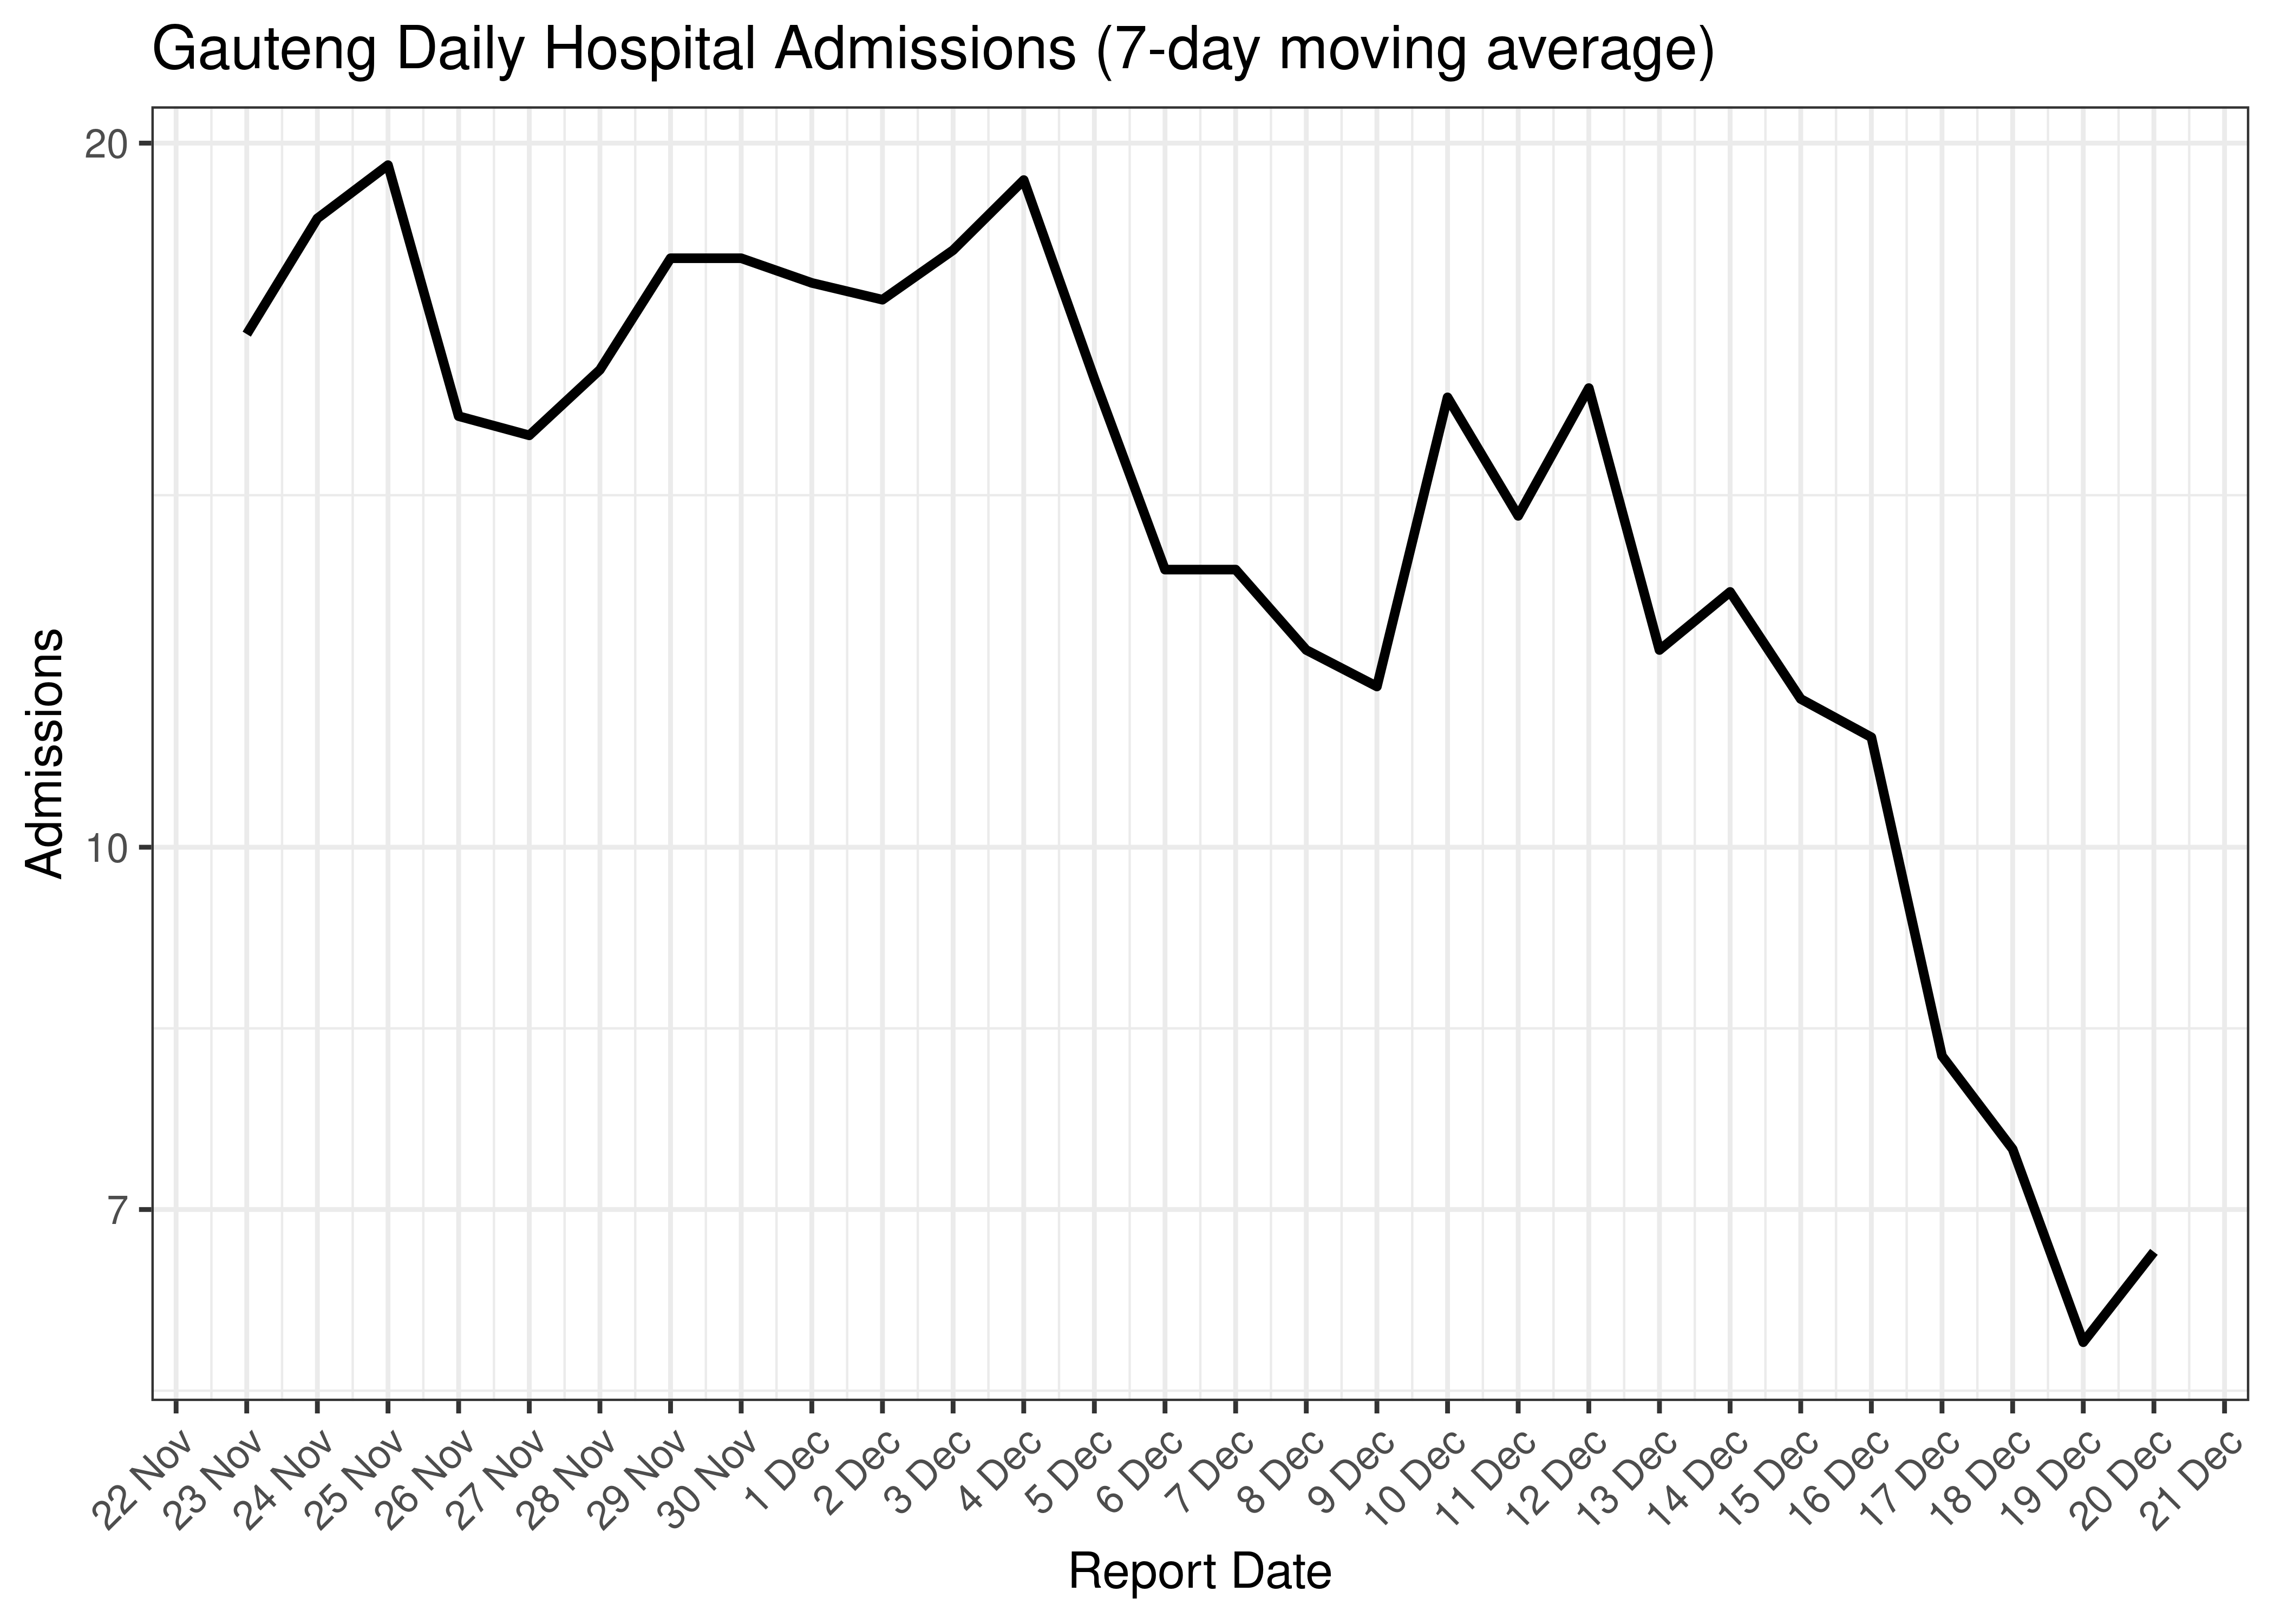 Gauteng Daily Hospital Admissions for Last 30-days (7-day moving average)